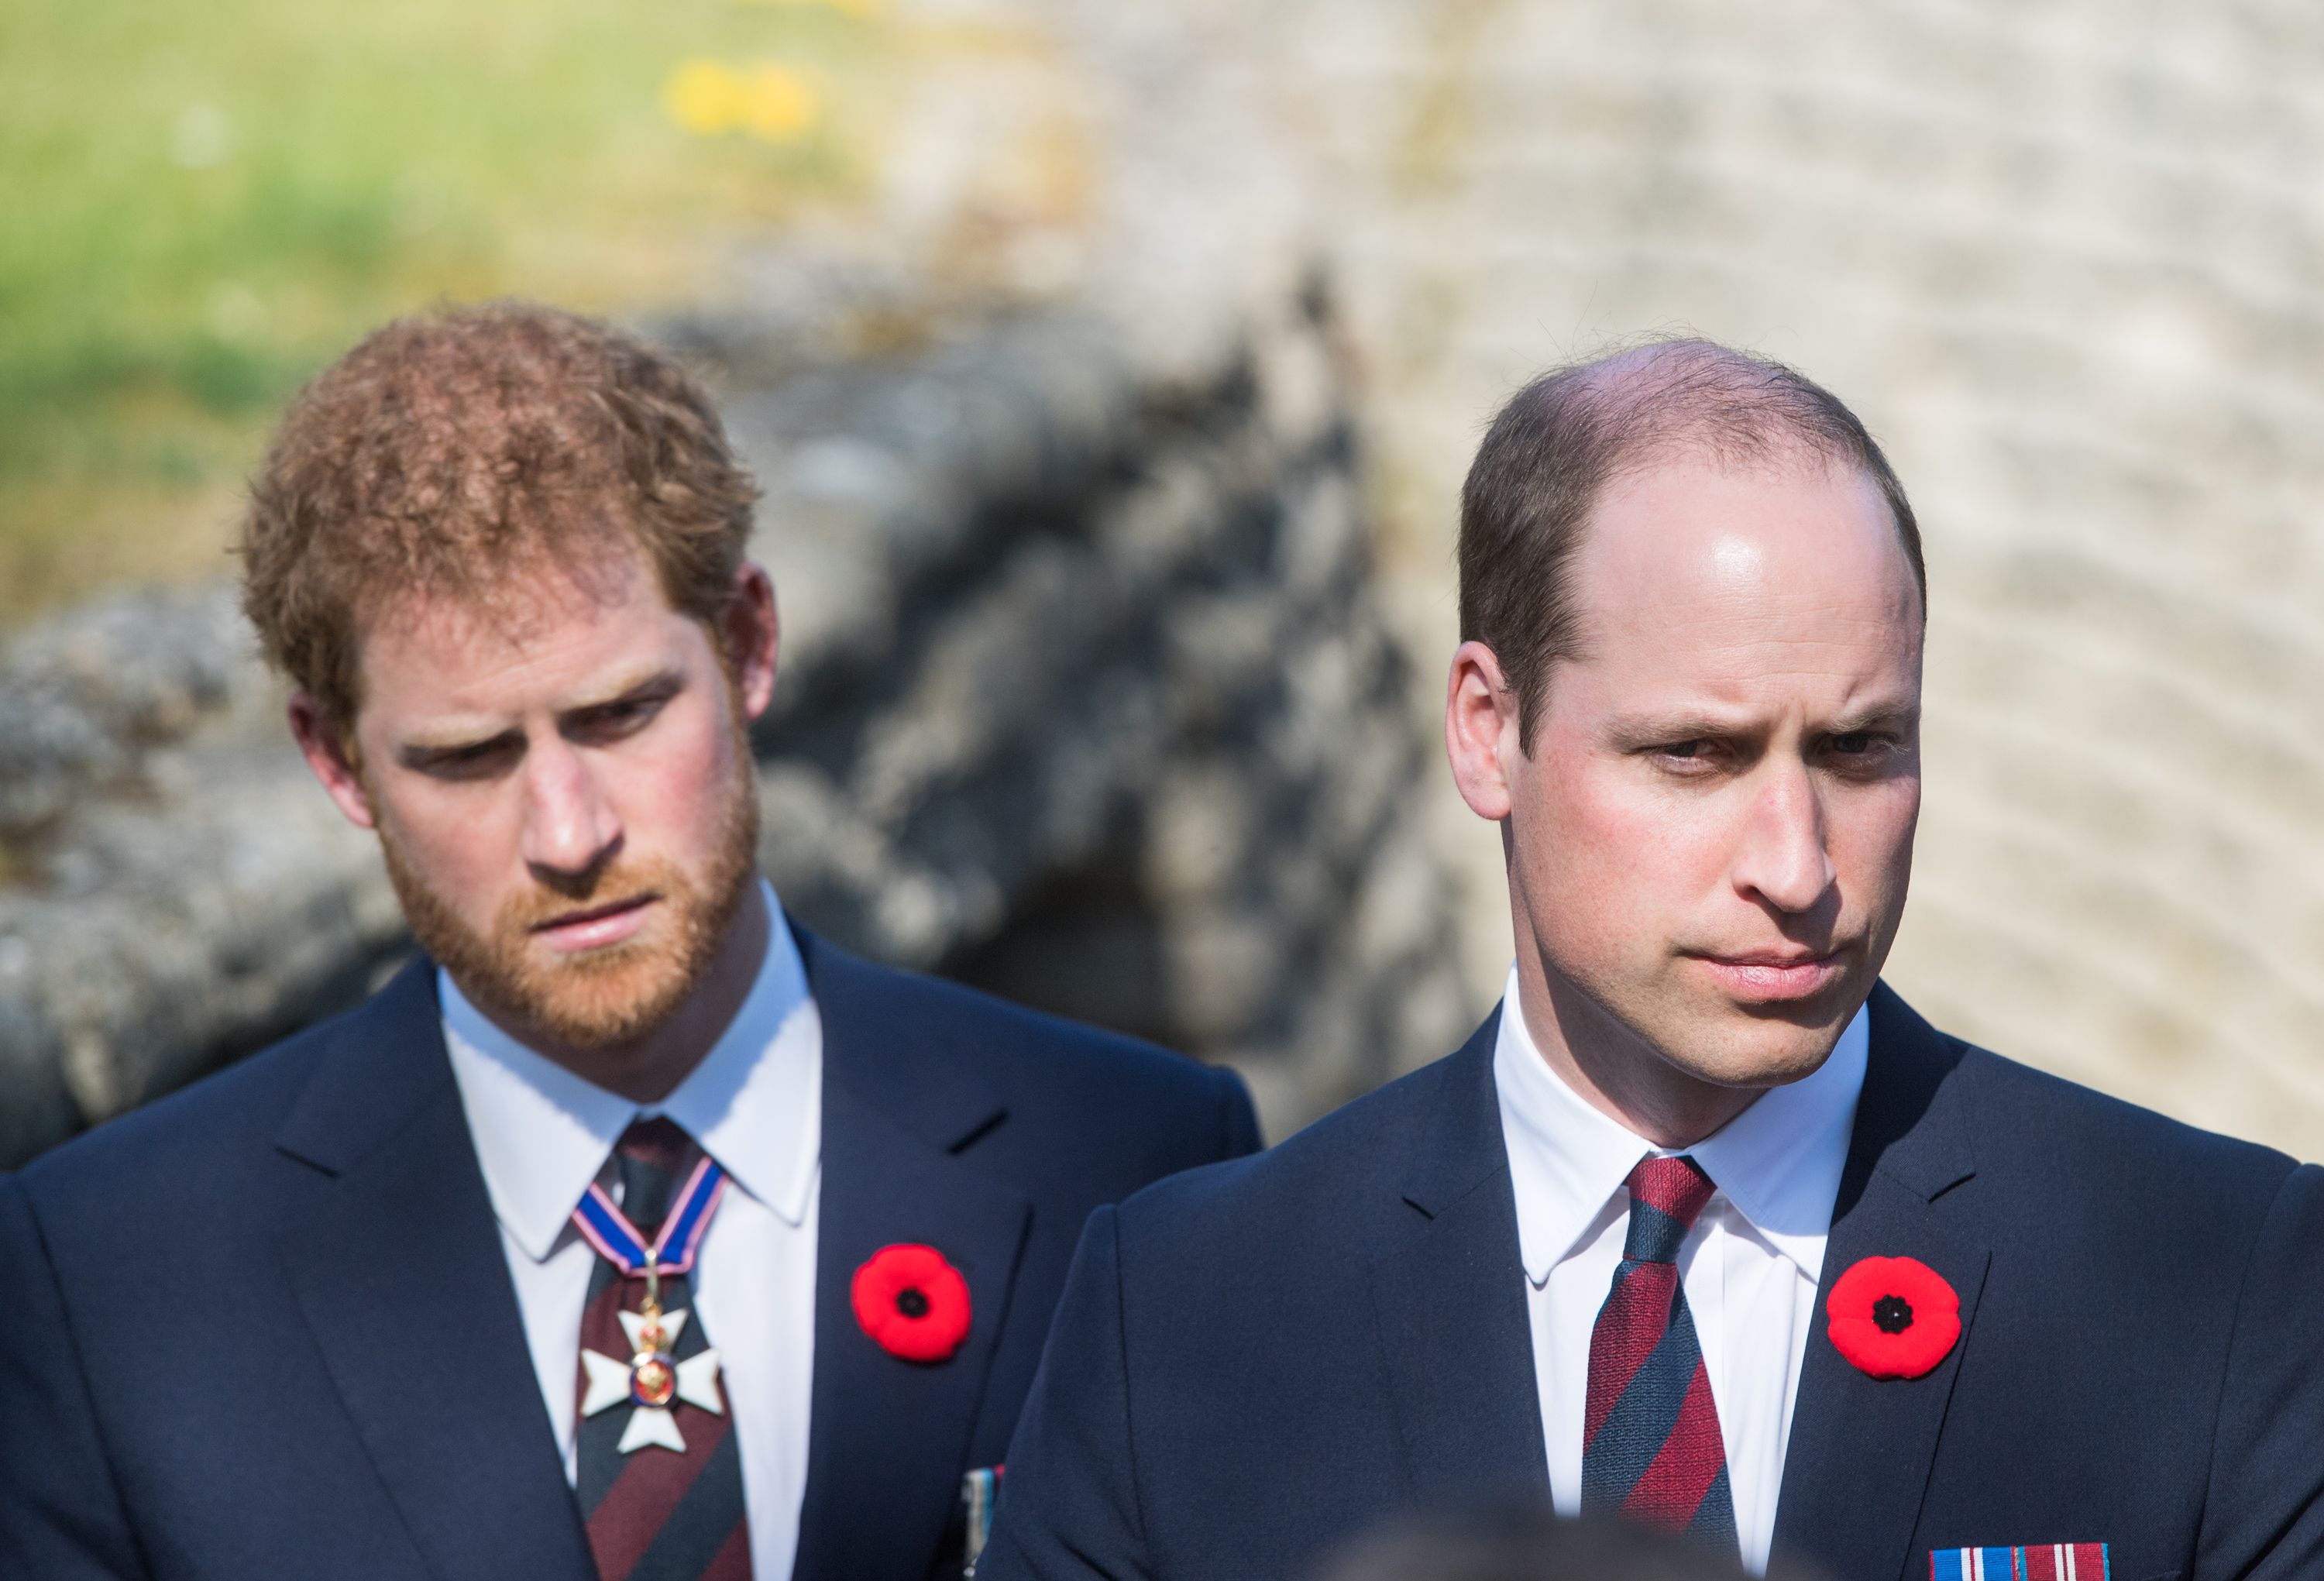 Prince Harry Accuses Prince William Of Physical Attack In His Memoir